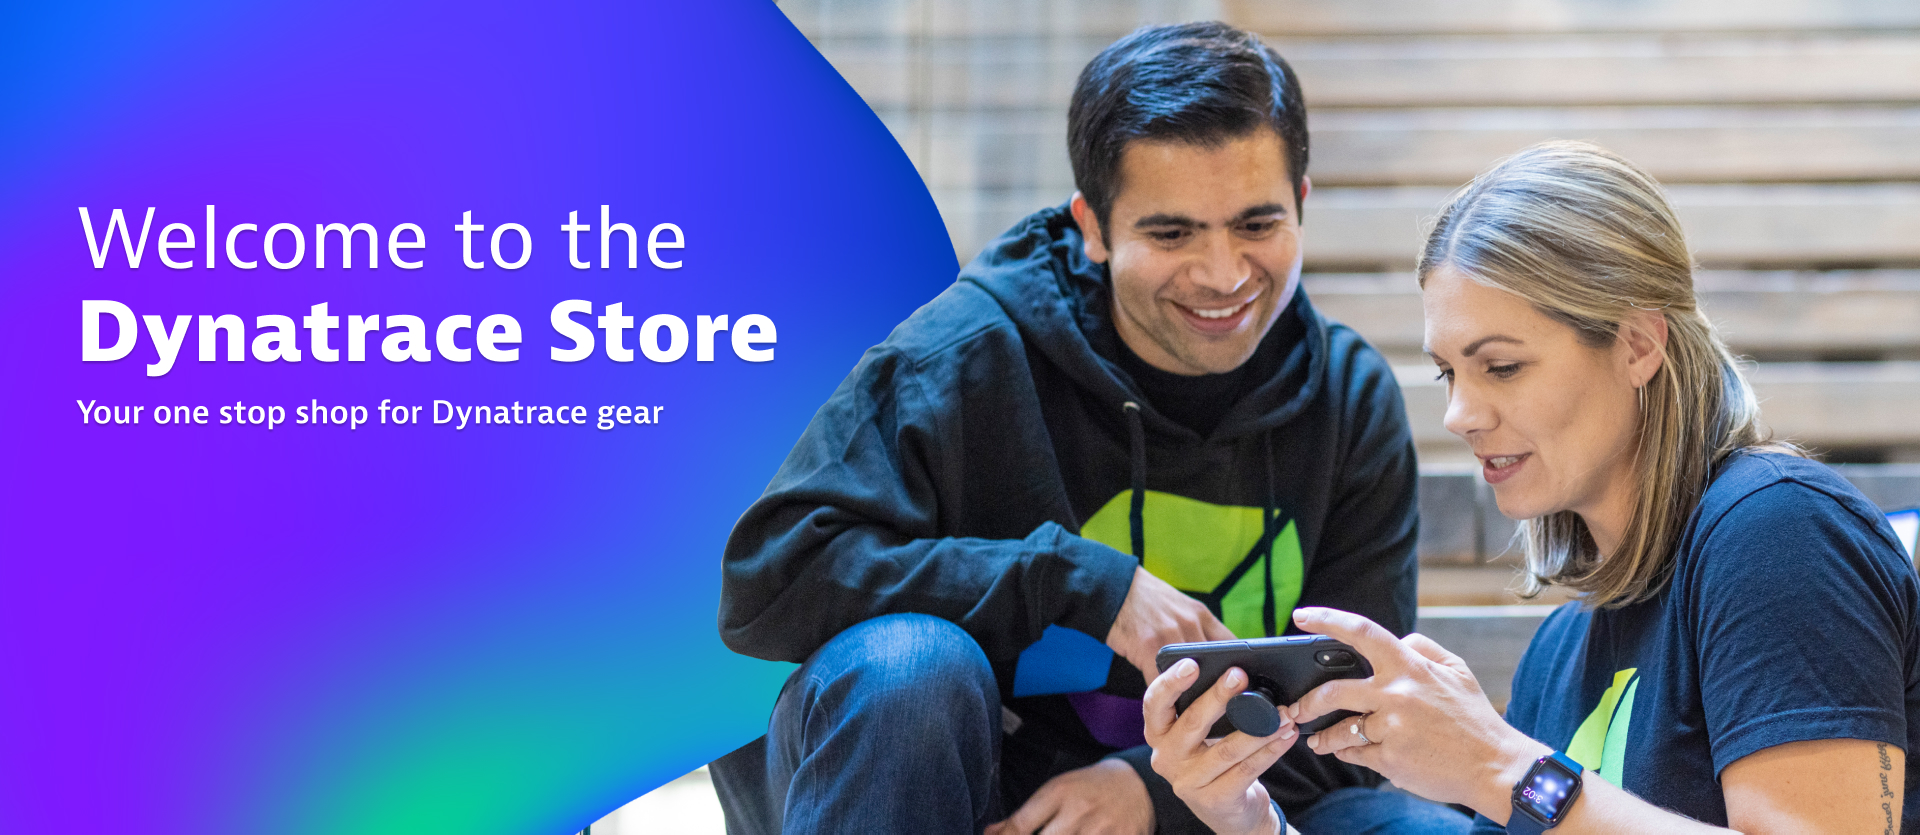 Welcome to the Dynatrace store. Your one stop shop for Dynatrace Gear